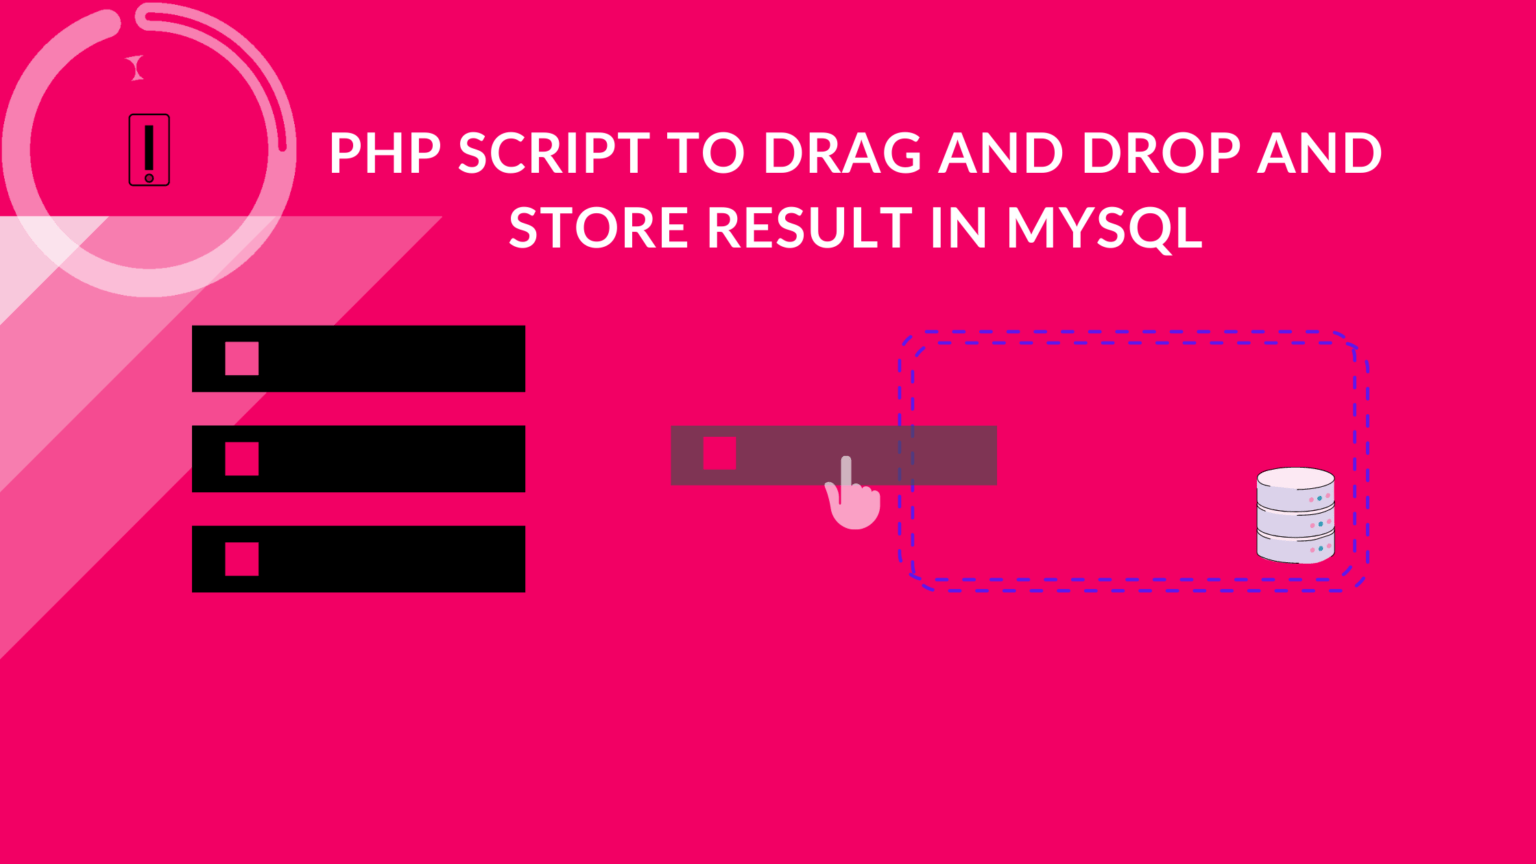 Клавиша Drag and Drop. Drag and Drop js php. Див дроп.